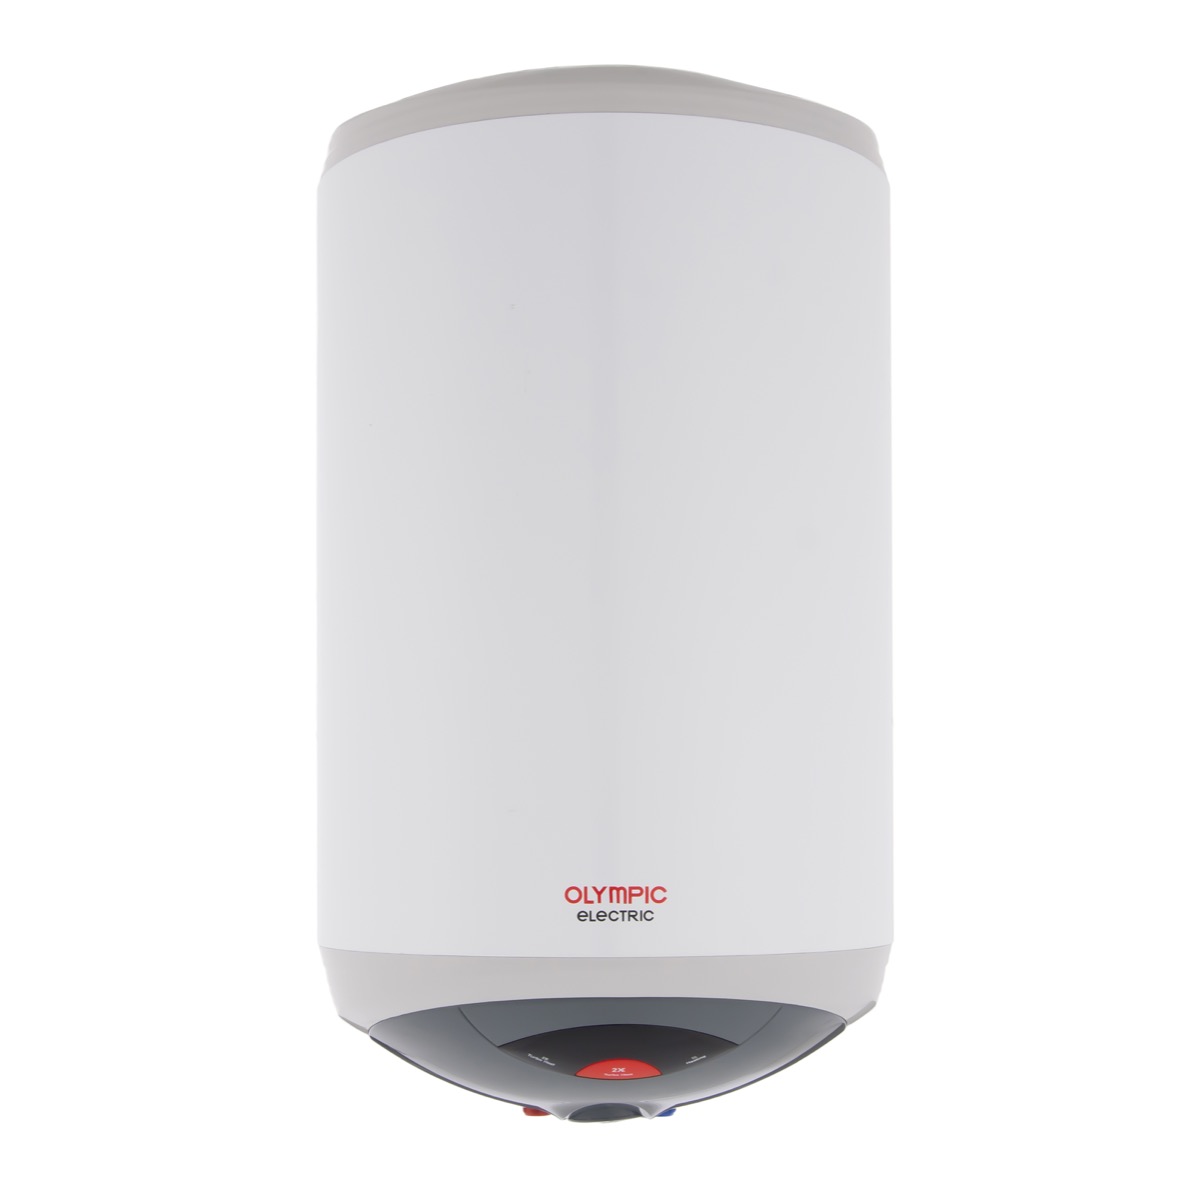 Olympic Electric Hero Turbo Digital Water Heater, 80 Litres - White